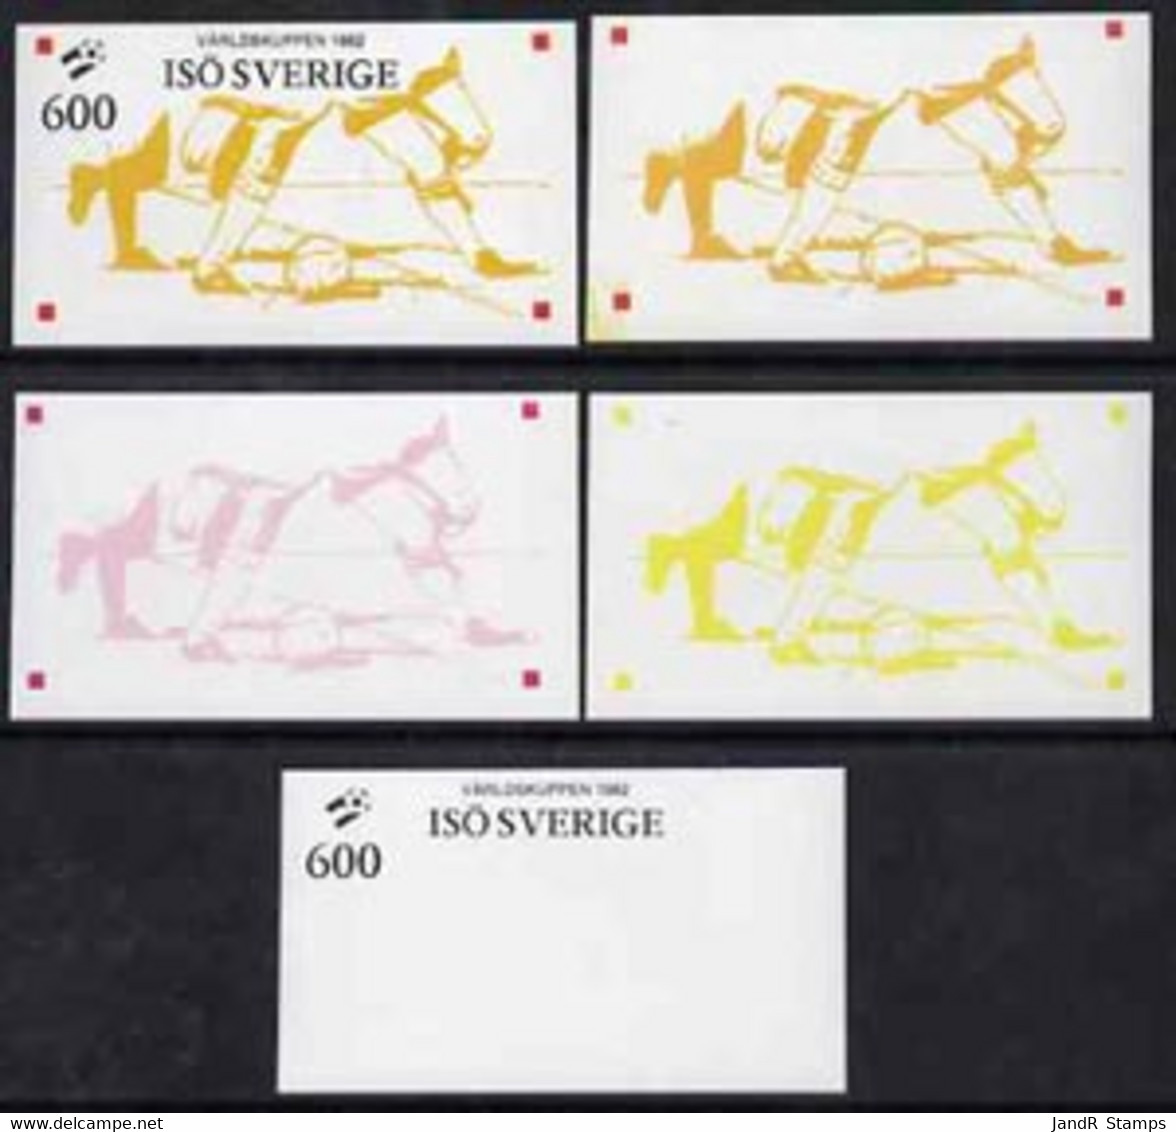 Iso - Sweden 1982 Football World Cup Imperf Souvenir Sheet (600 Value) Set Of 5 Progressive Colour Proofs Comprising The - Emissions Locales